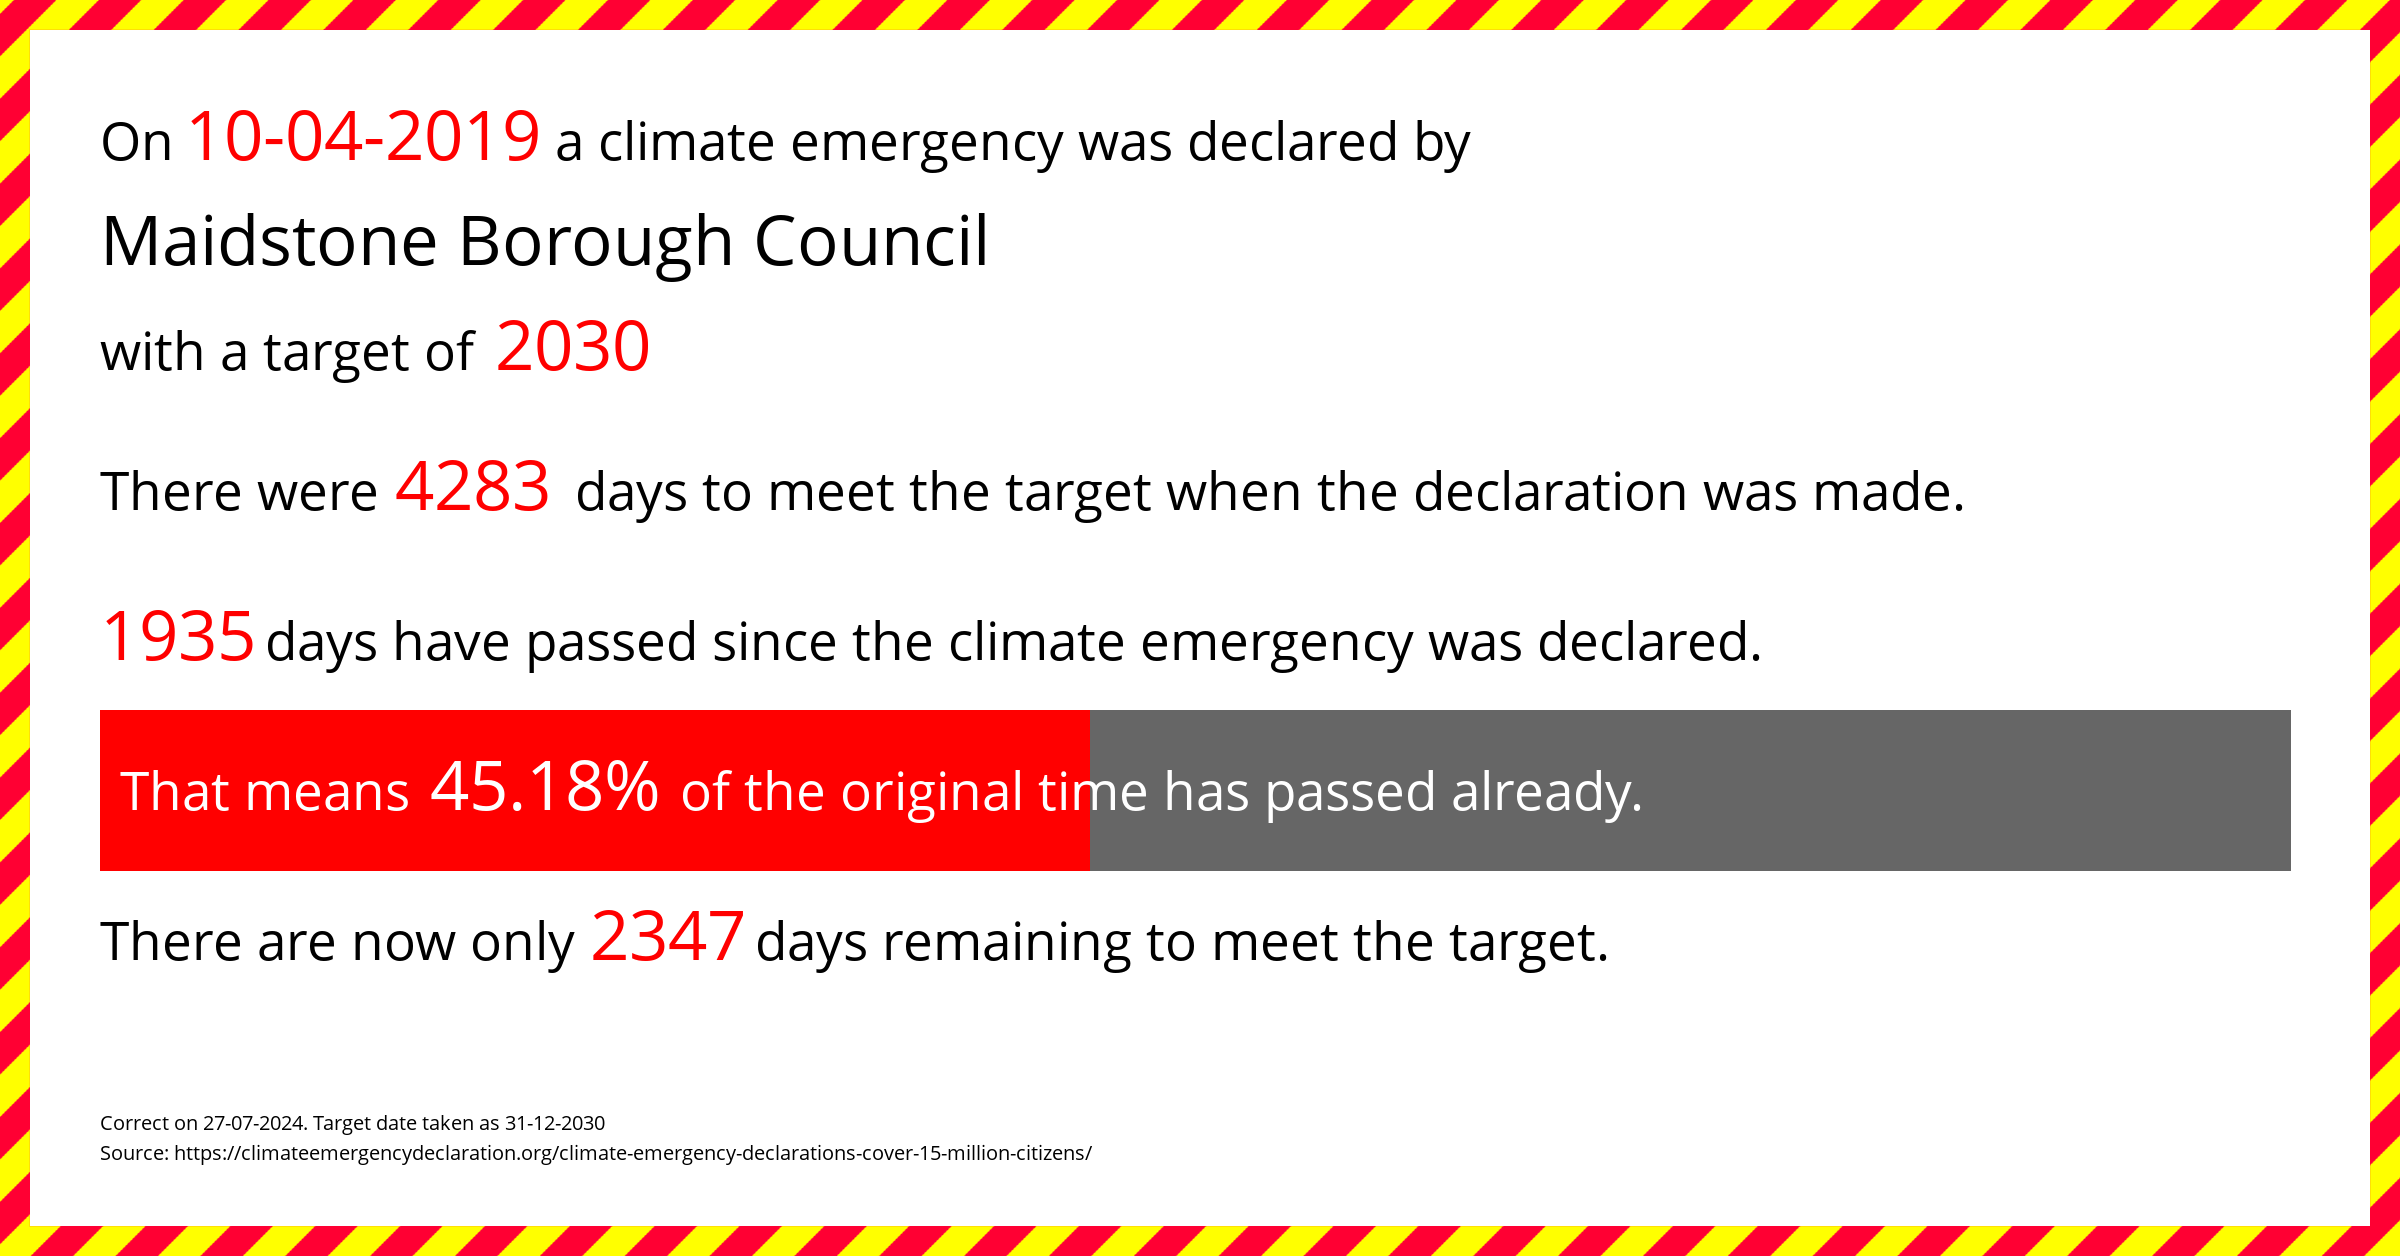 Maidstone Borough Council declared a Climate emergency on Wednesday 10th April 2019, with a target of 2030.